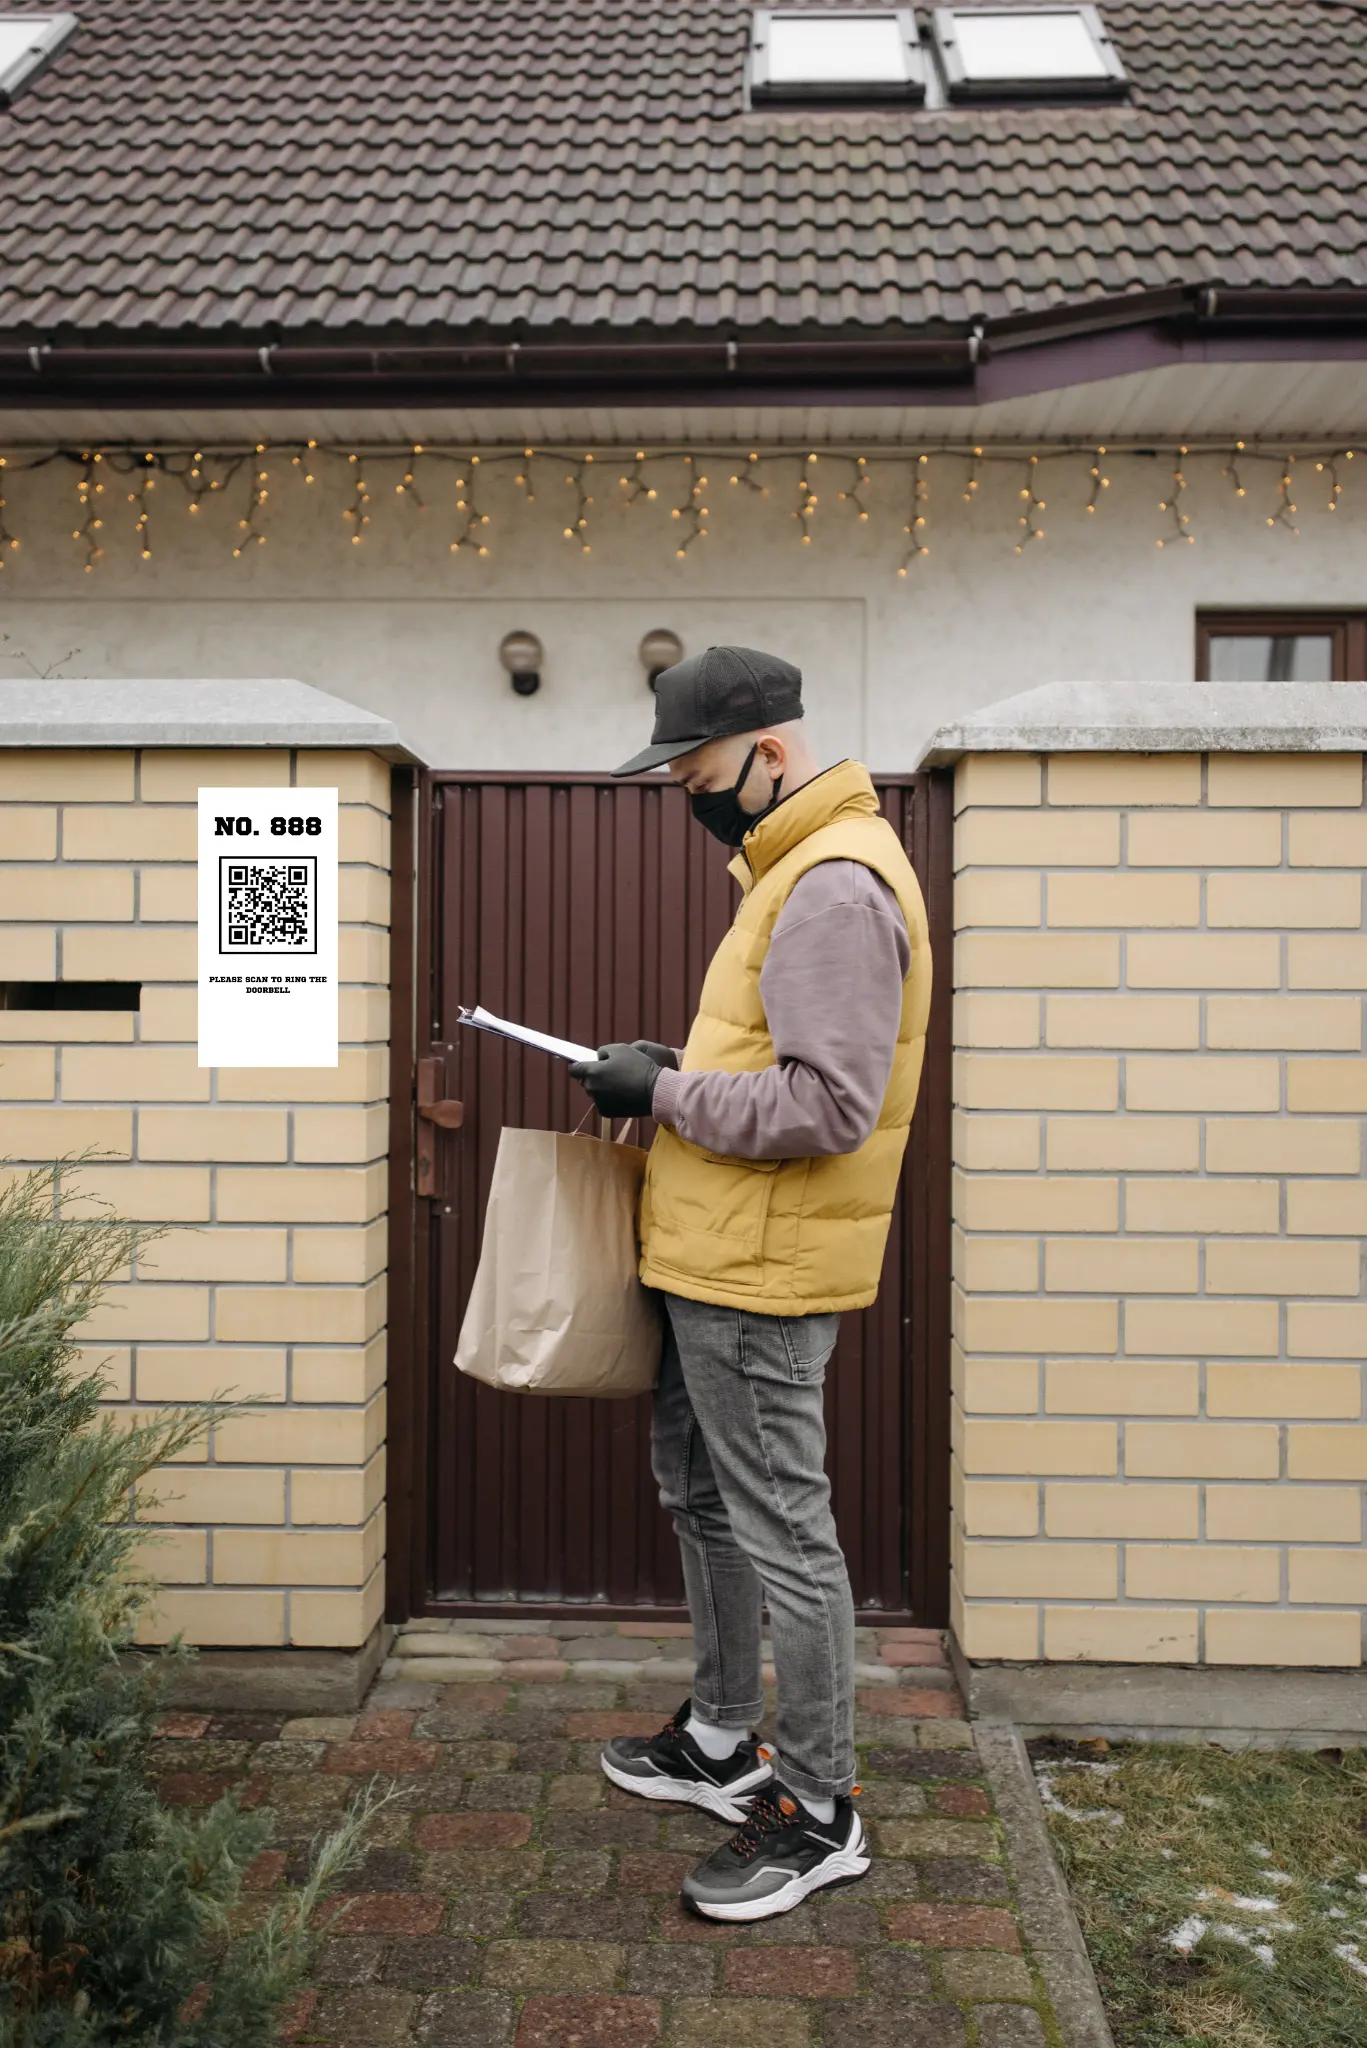 QR bell, delivery man in yellow vest, brown paper bag, fence